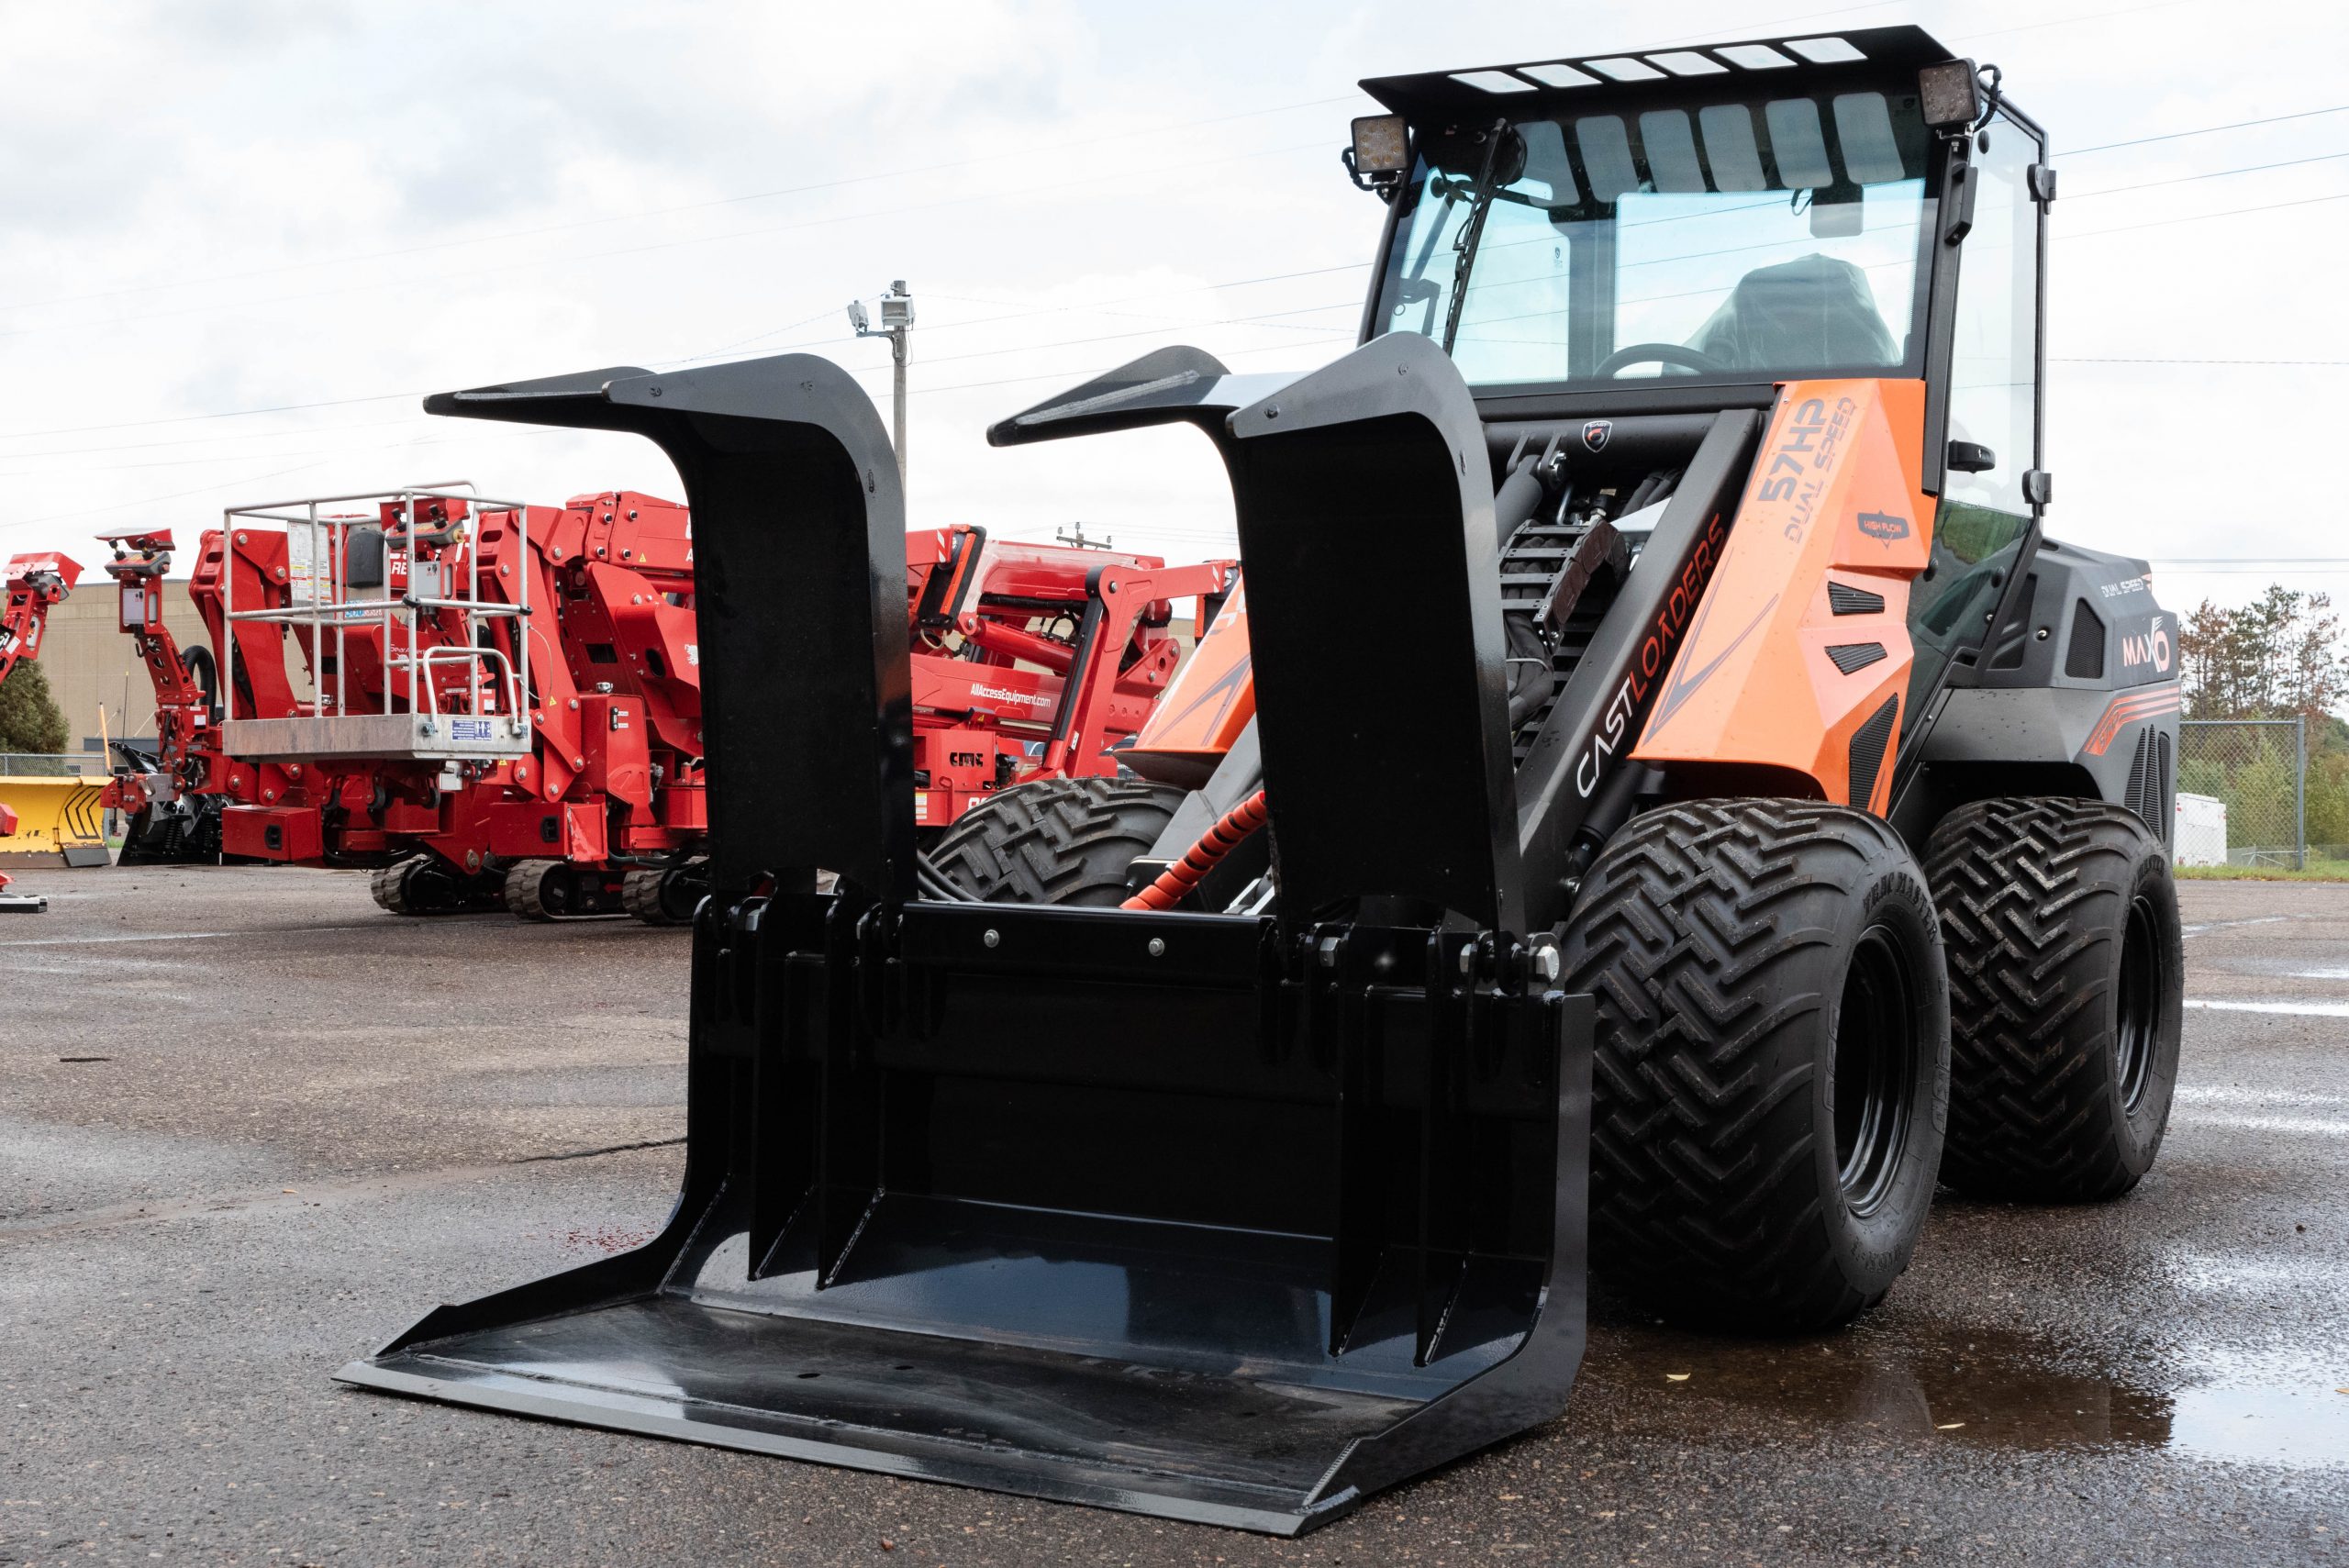 Cast Loaders MAXO with TNA Log Grapple at TNE Distributing compact articulating loaders